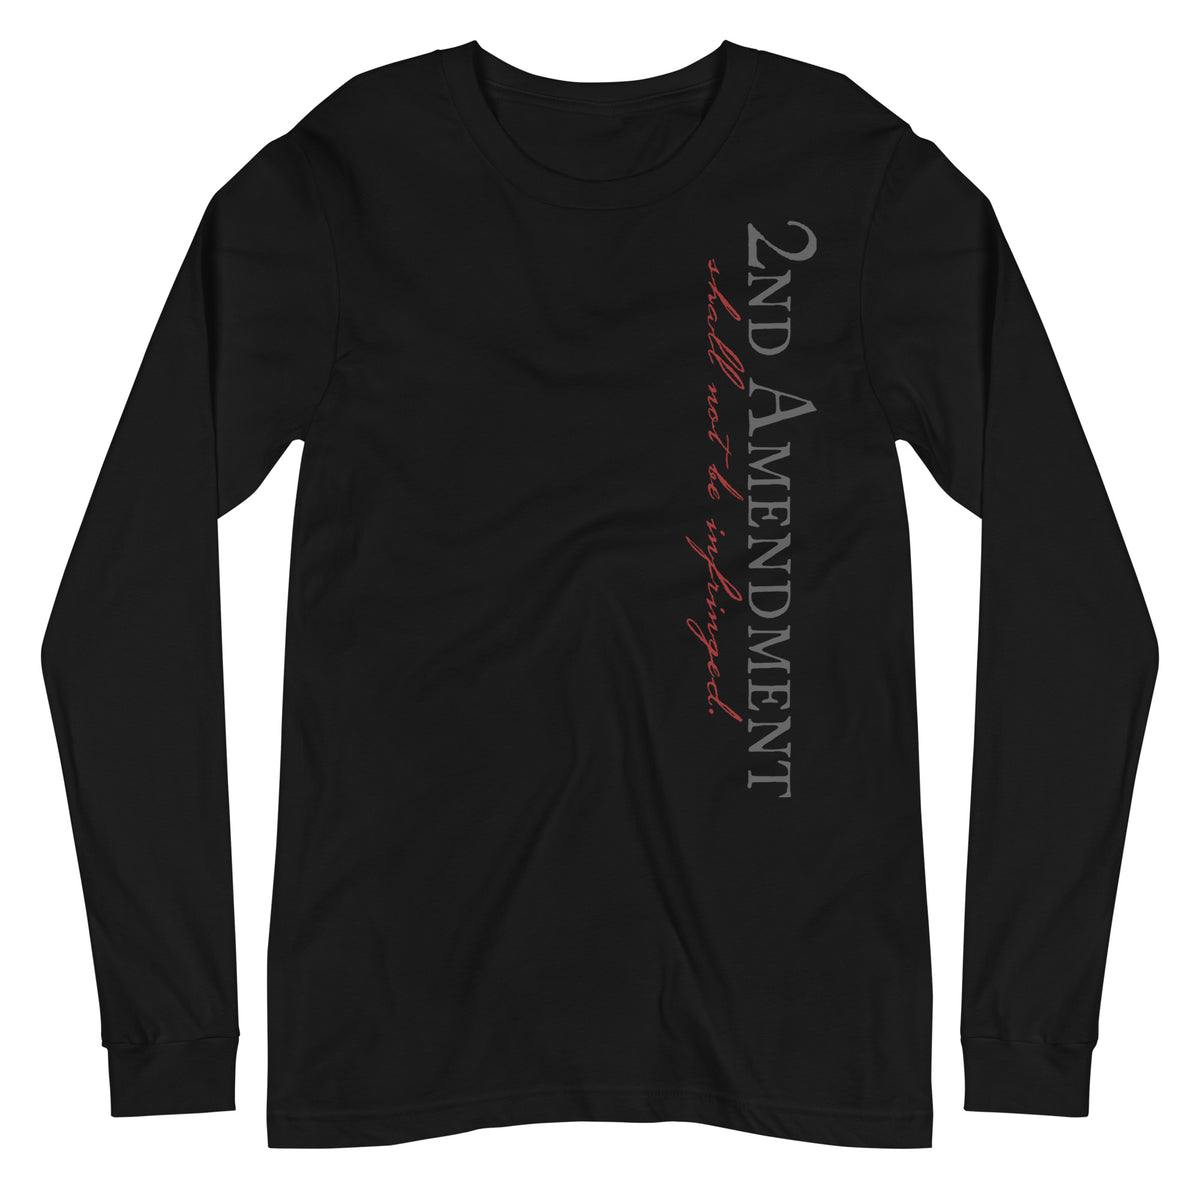 The Bill of Rights 2A Onyx Long Sleeve